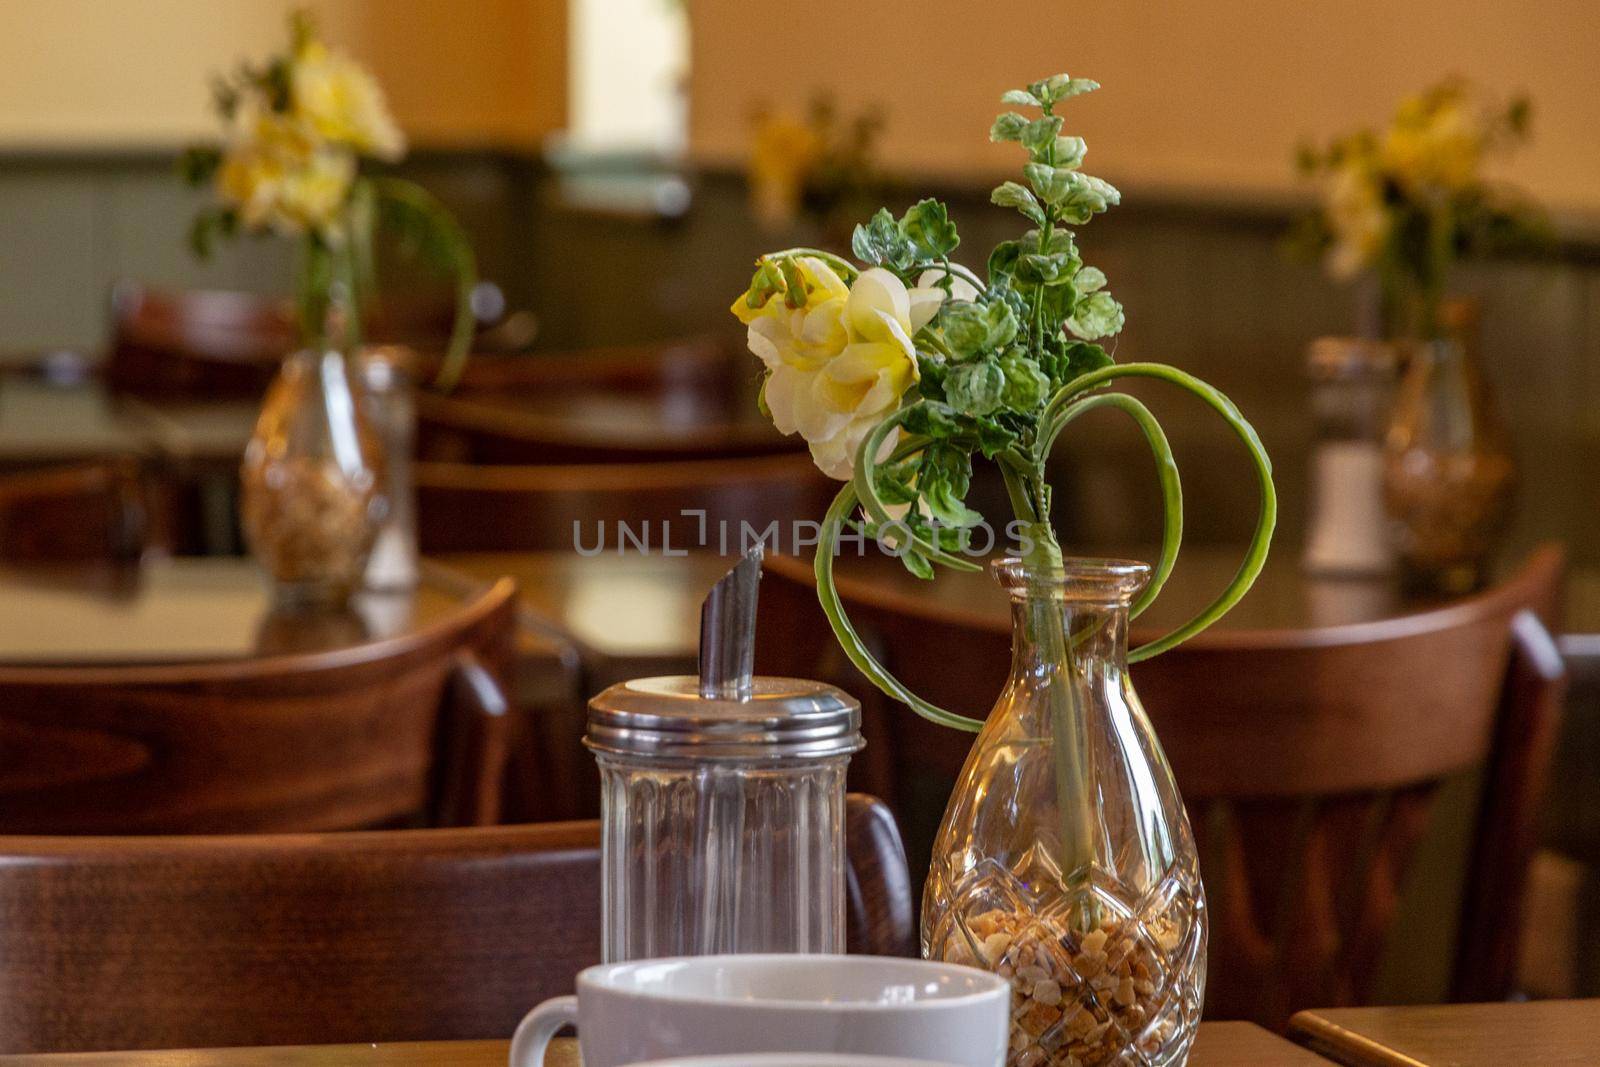 Yellow flowers in a glass vase on cafe table by a sugar jar